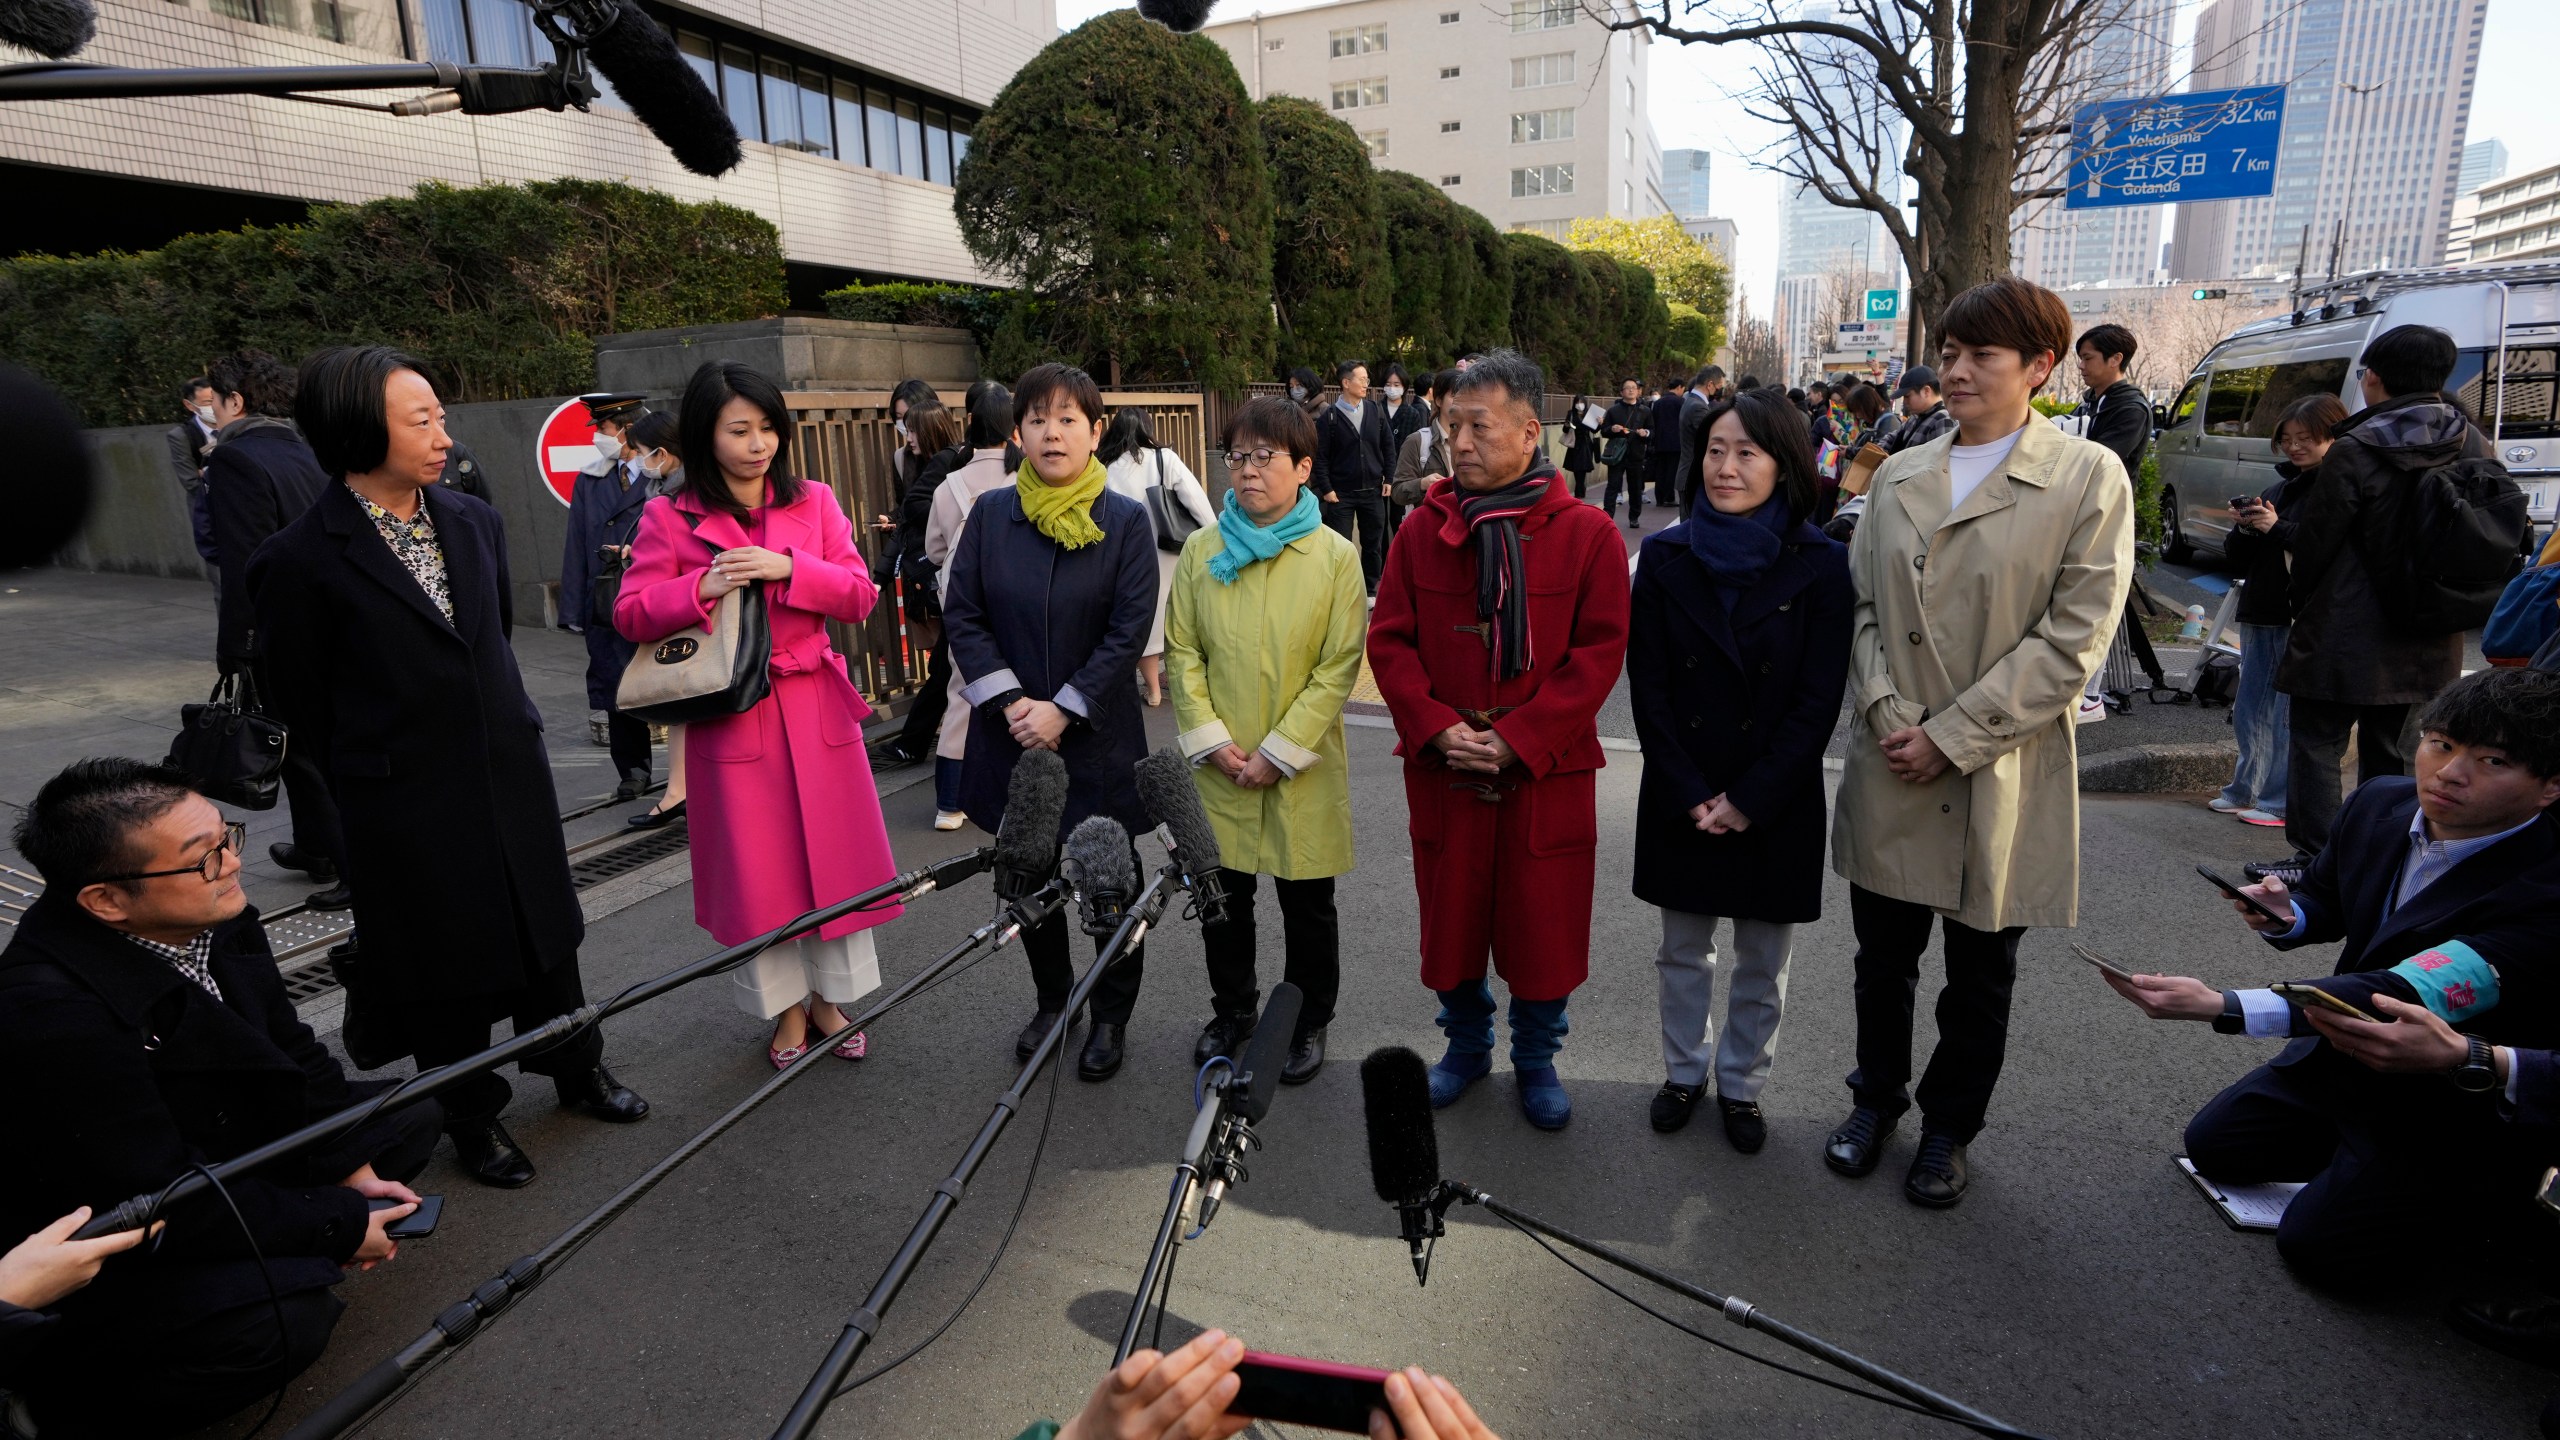 One of the plaintiffs, with a green scarf, fourth left, speaks before media members by the main entrance of the Tokyo district court before hearing the ruling regarding LGBTQ+ marriage rights, in Tokyo, Thursday, March 14, 2024. The Japanese court on Thursday ruled that not allowing same-sex couples the same marital benefits as heterosexuals violates their fundamental right to have a family, but the current civil law did not take into consideration sexual diversity and is not clearly unconstitutional, a partial victory for Japan's LGBTQ+ community calling for equal marriage rights.(AP Photo/Hiro Komae)